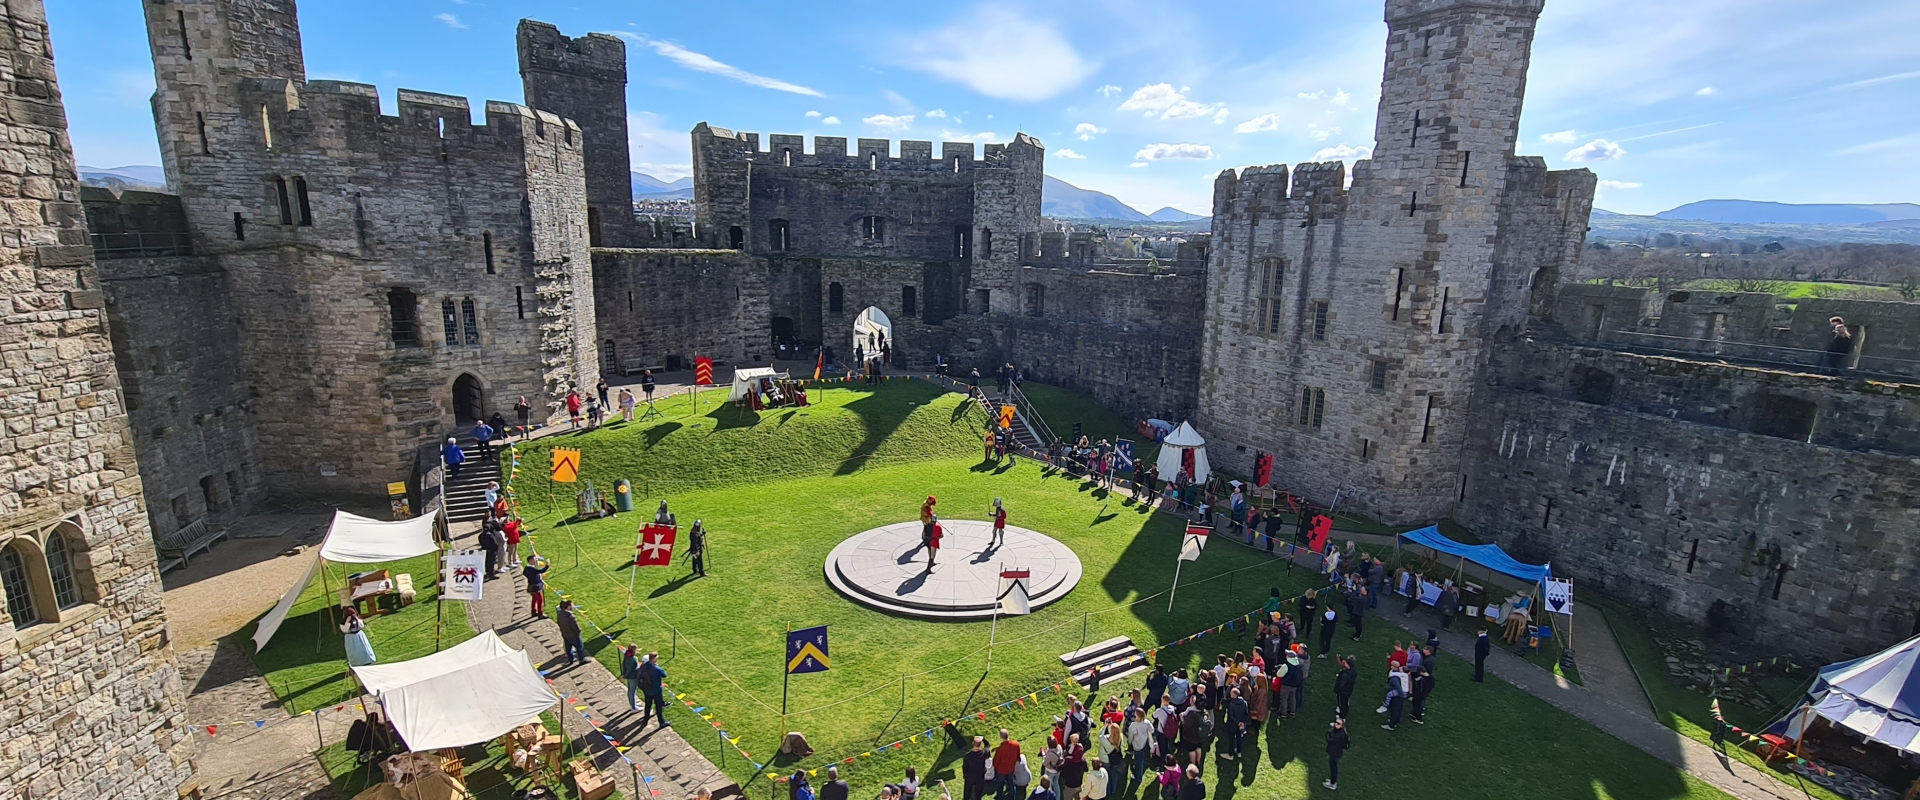 golygfa o ail-greu ar dir y castell / view of re-enactors in the castle grounds